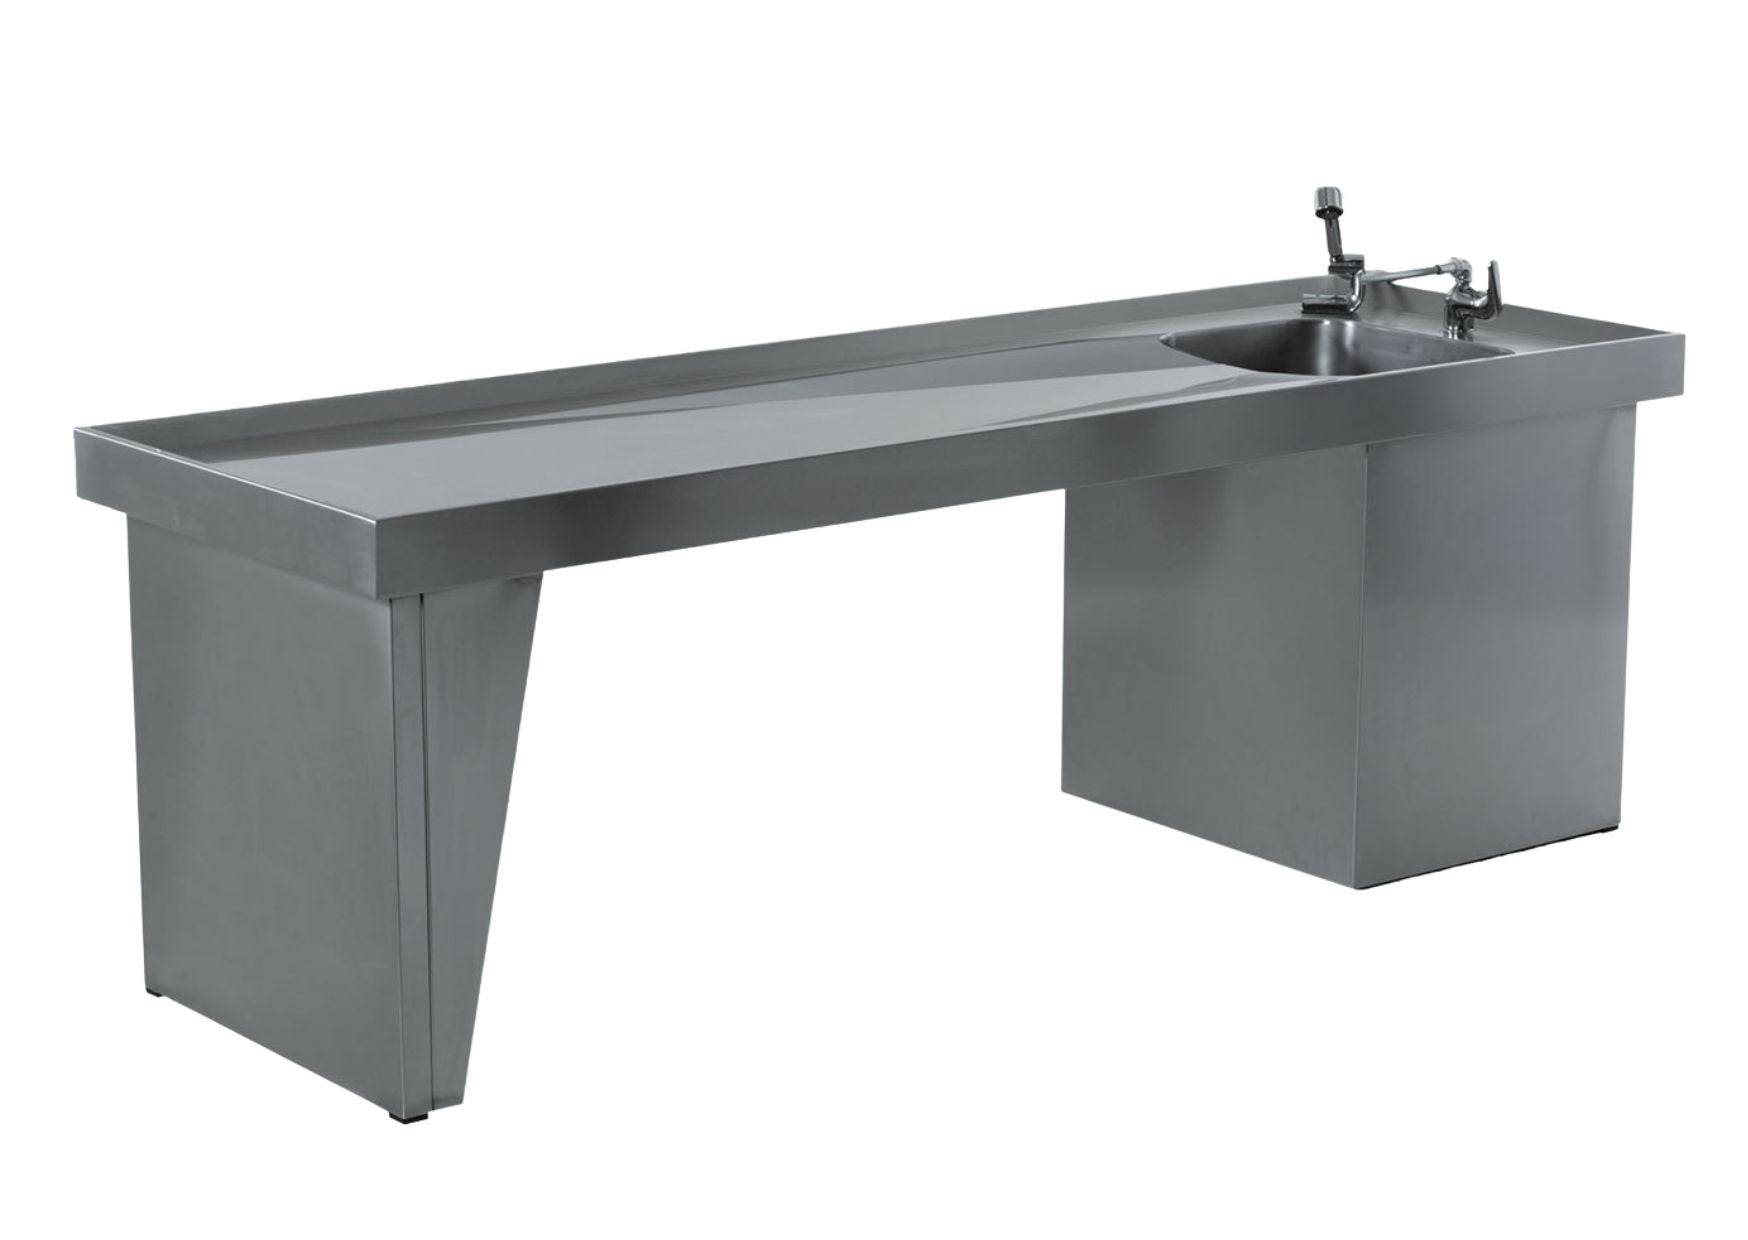 Stainless steel autopsy table Dissection table with organ basin and control panel